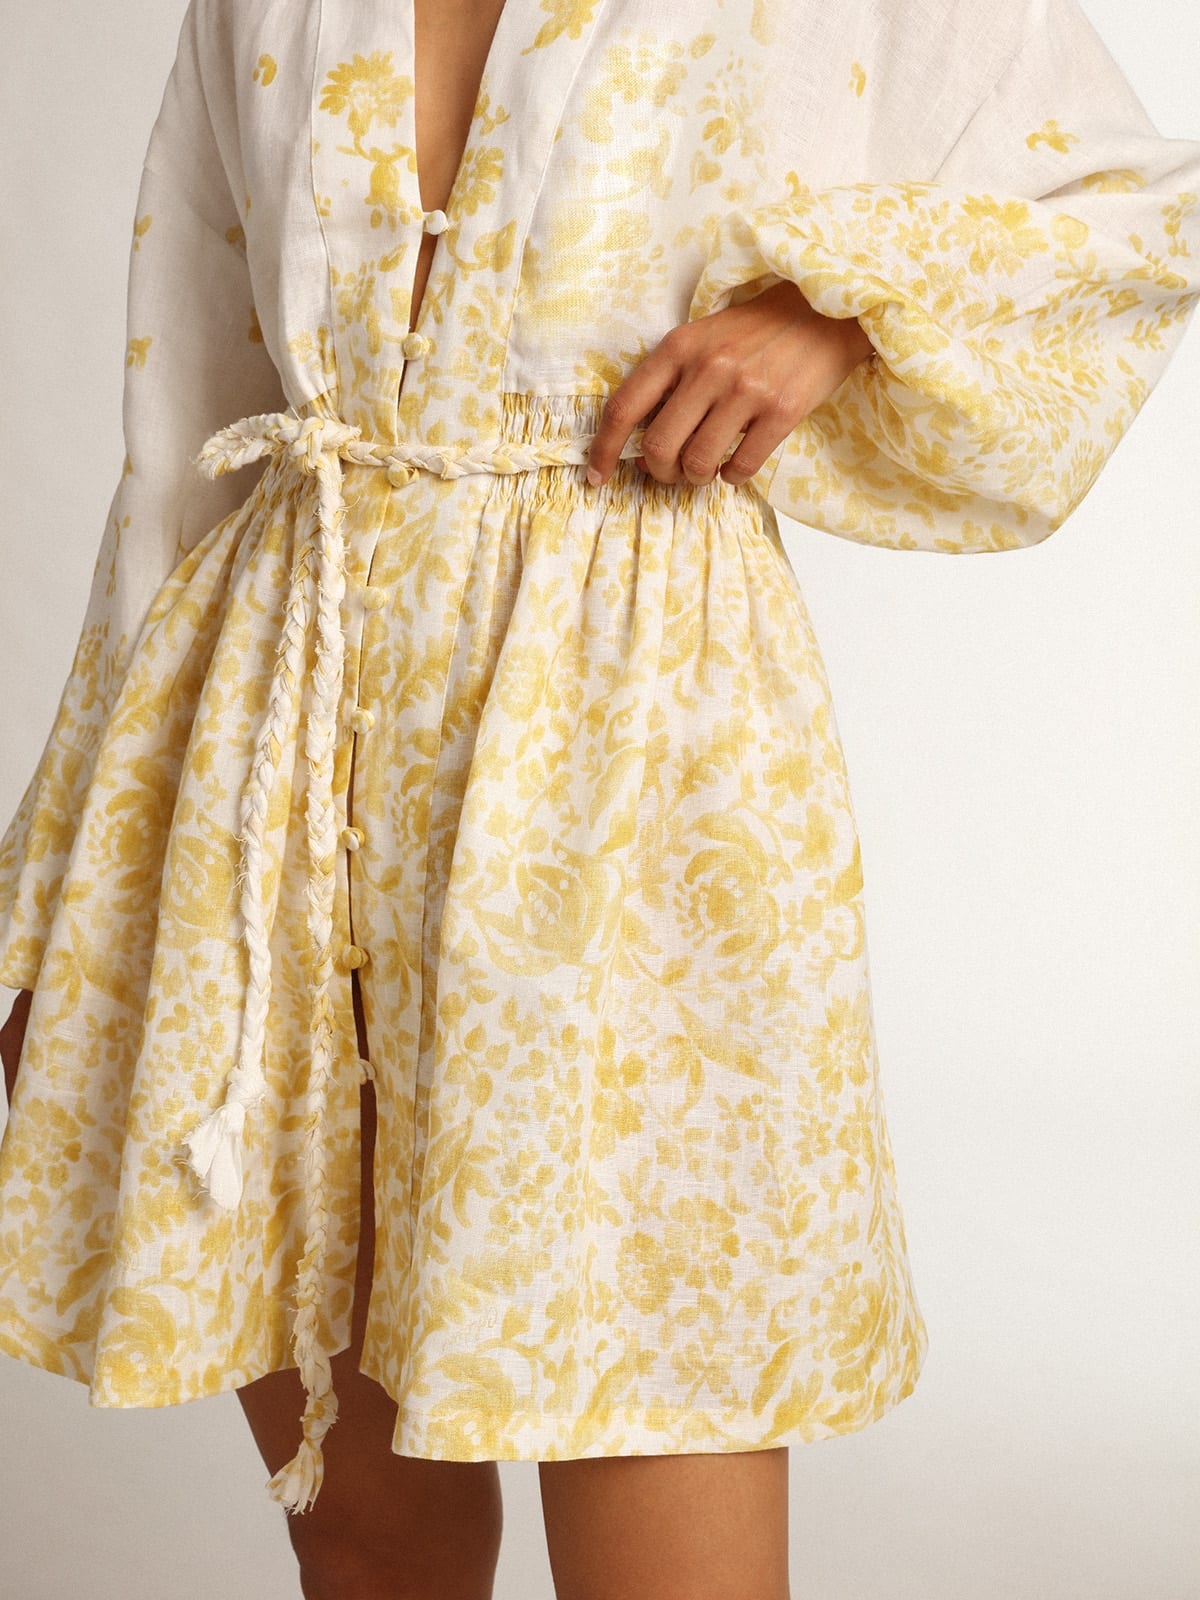 Resort Collection Mini Dress in linen with lemon yellow print - 5